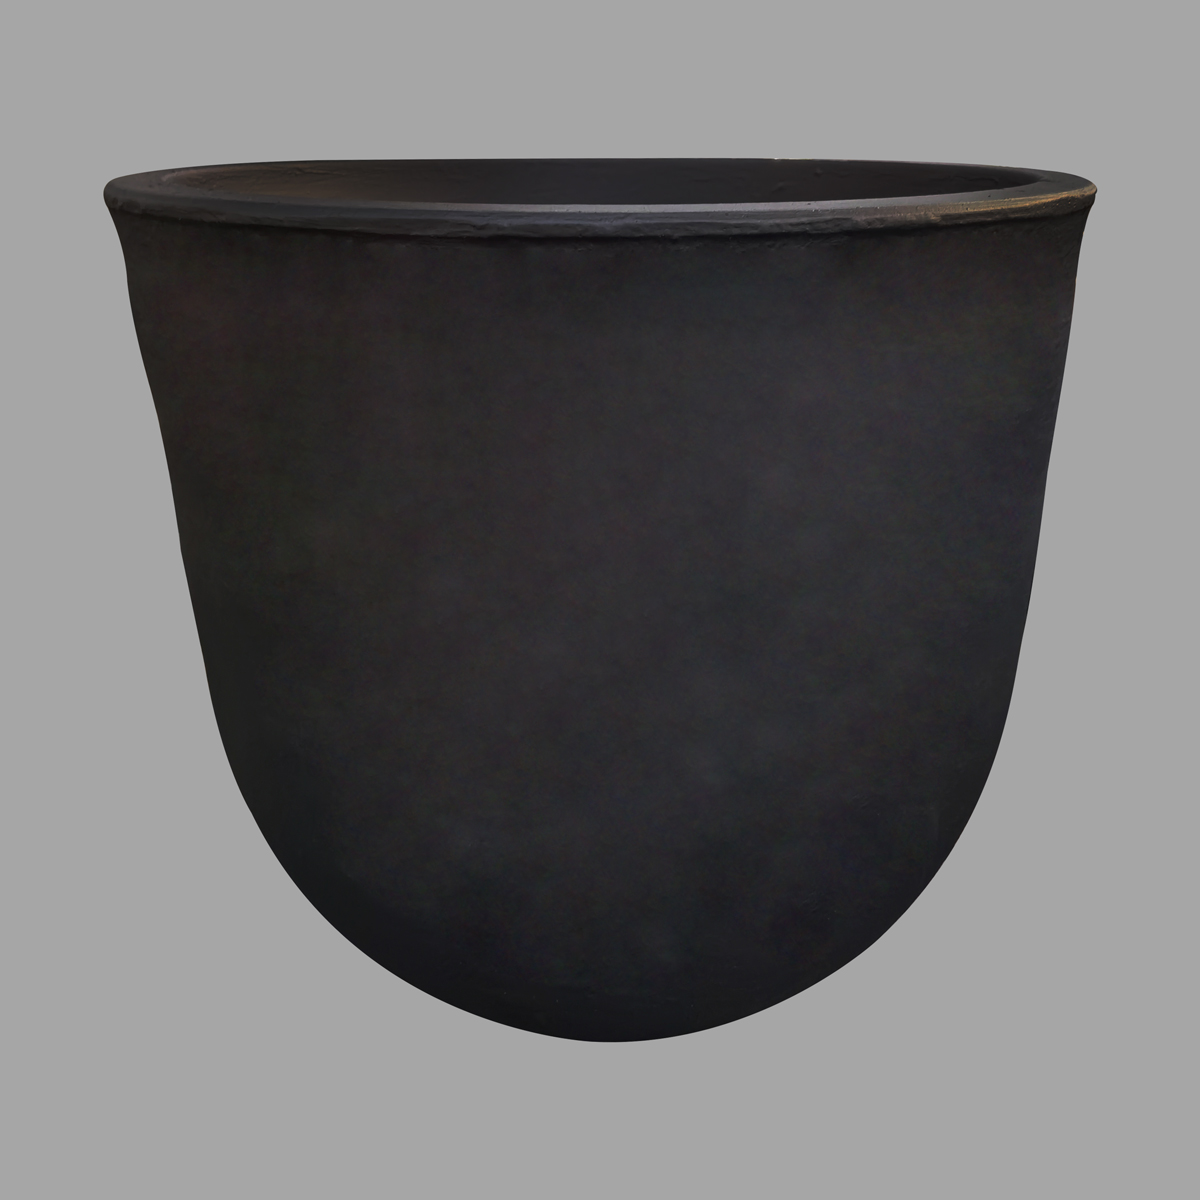 Manufacture of Multiple Specifications Carbon Graphite Crucibles